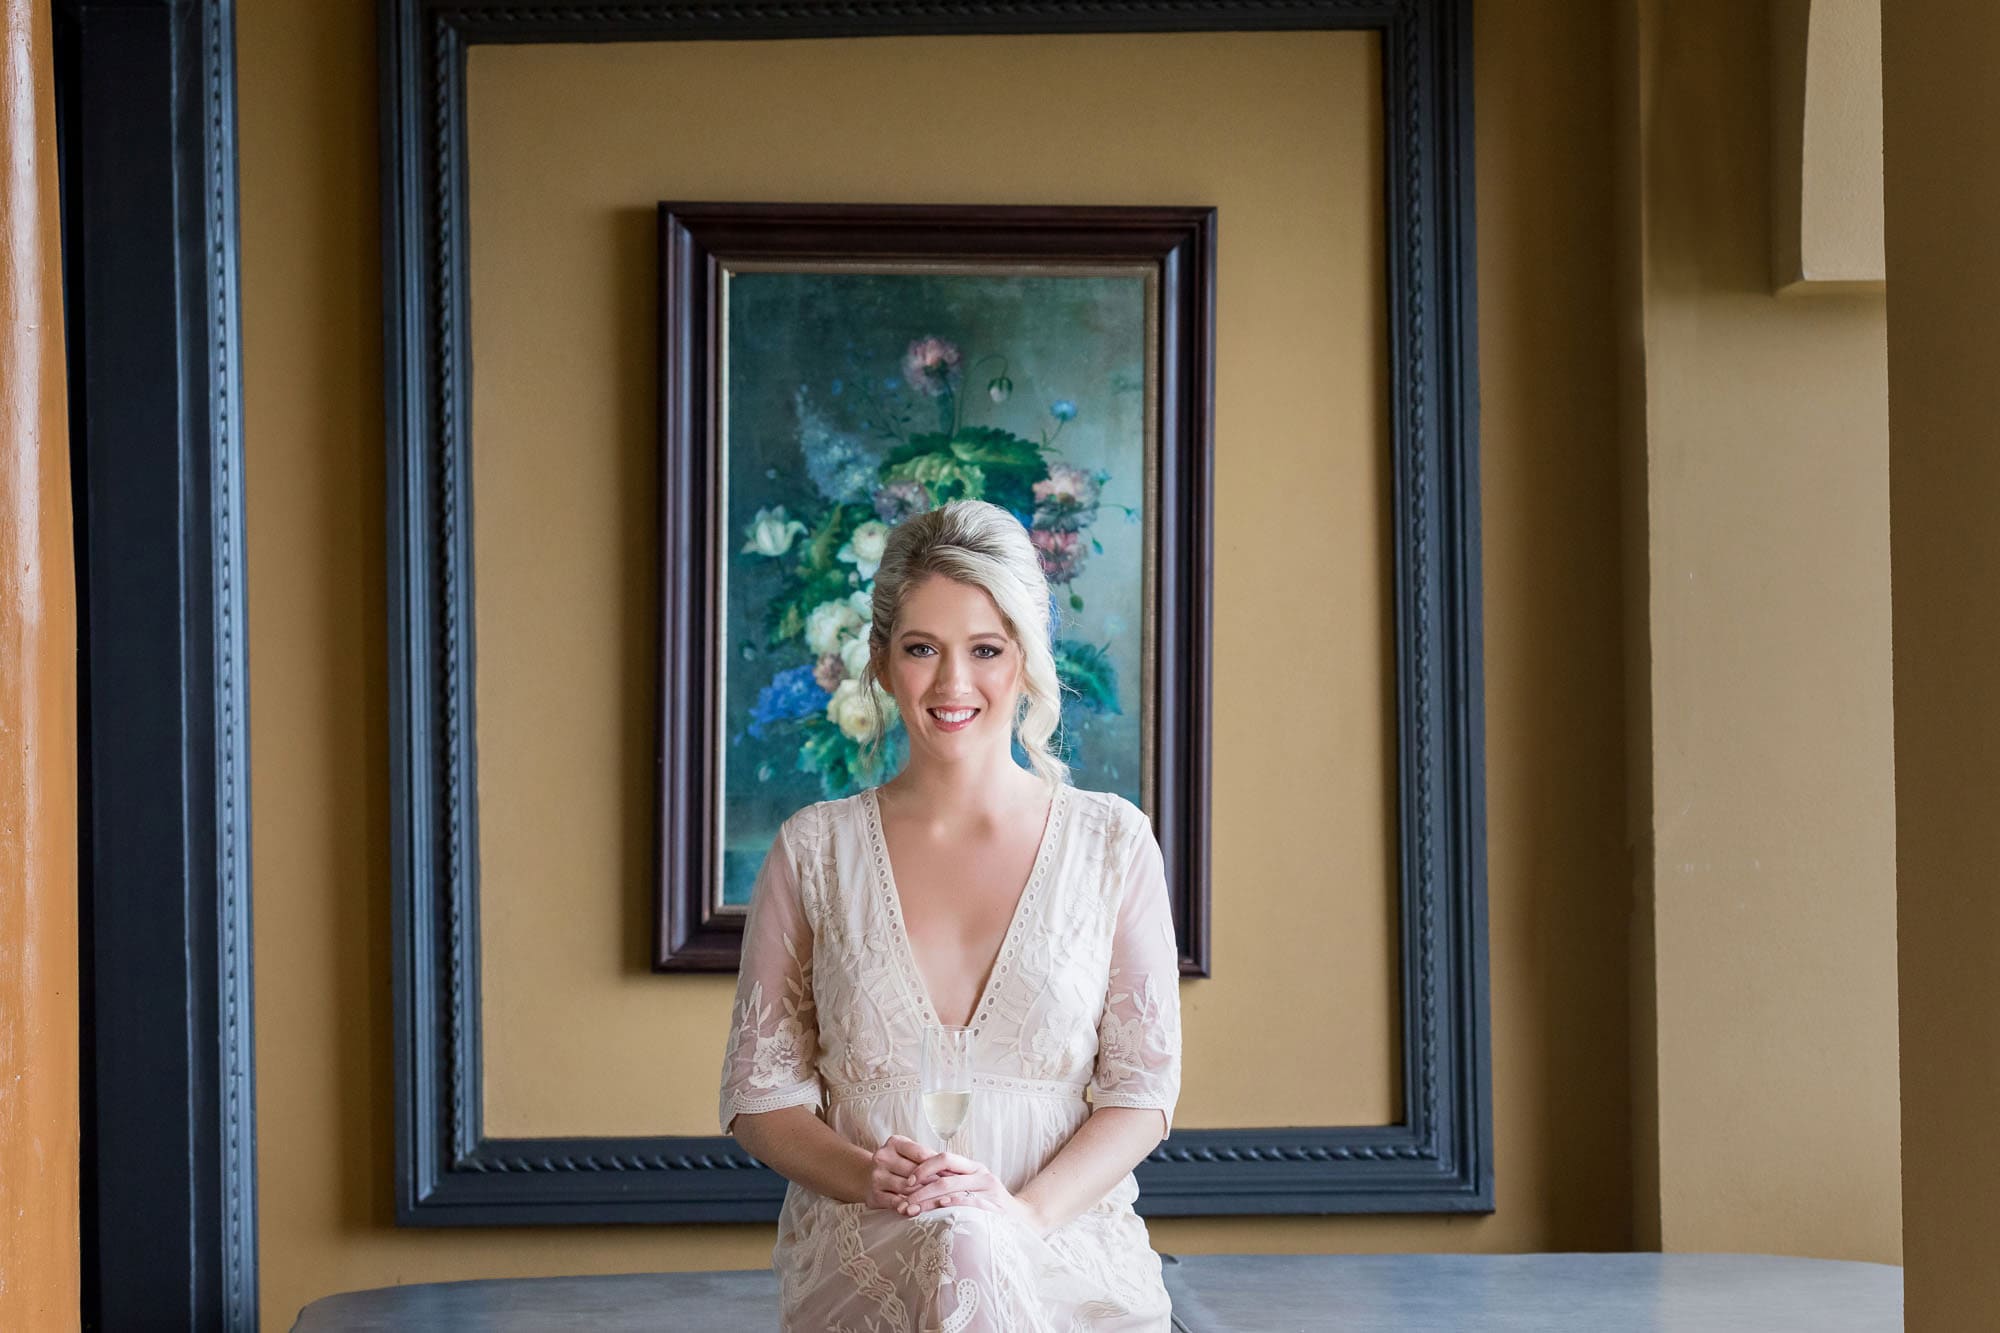 The bride framed by a frame within a frame